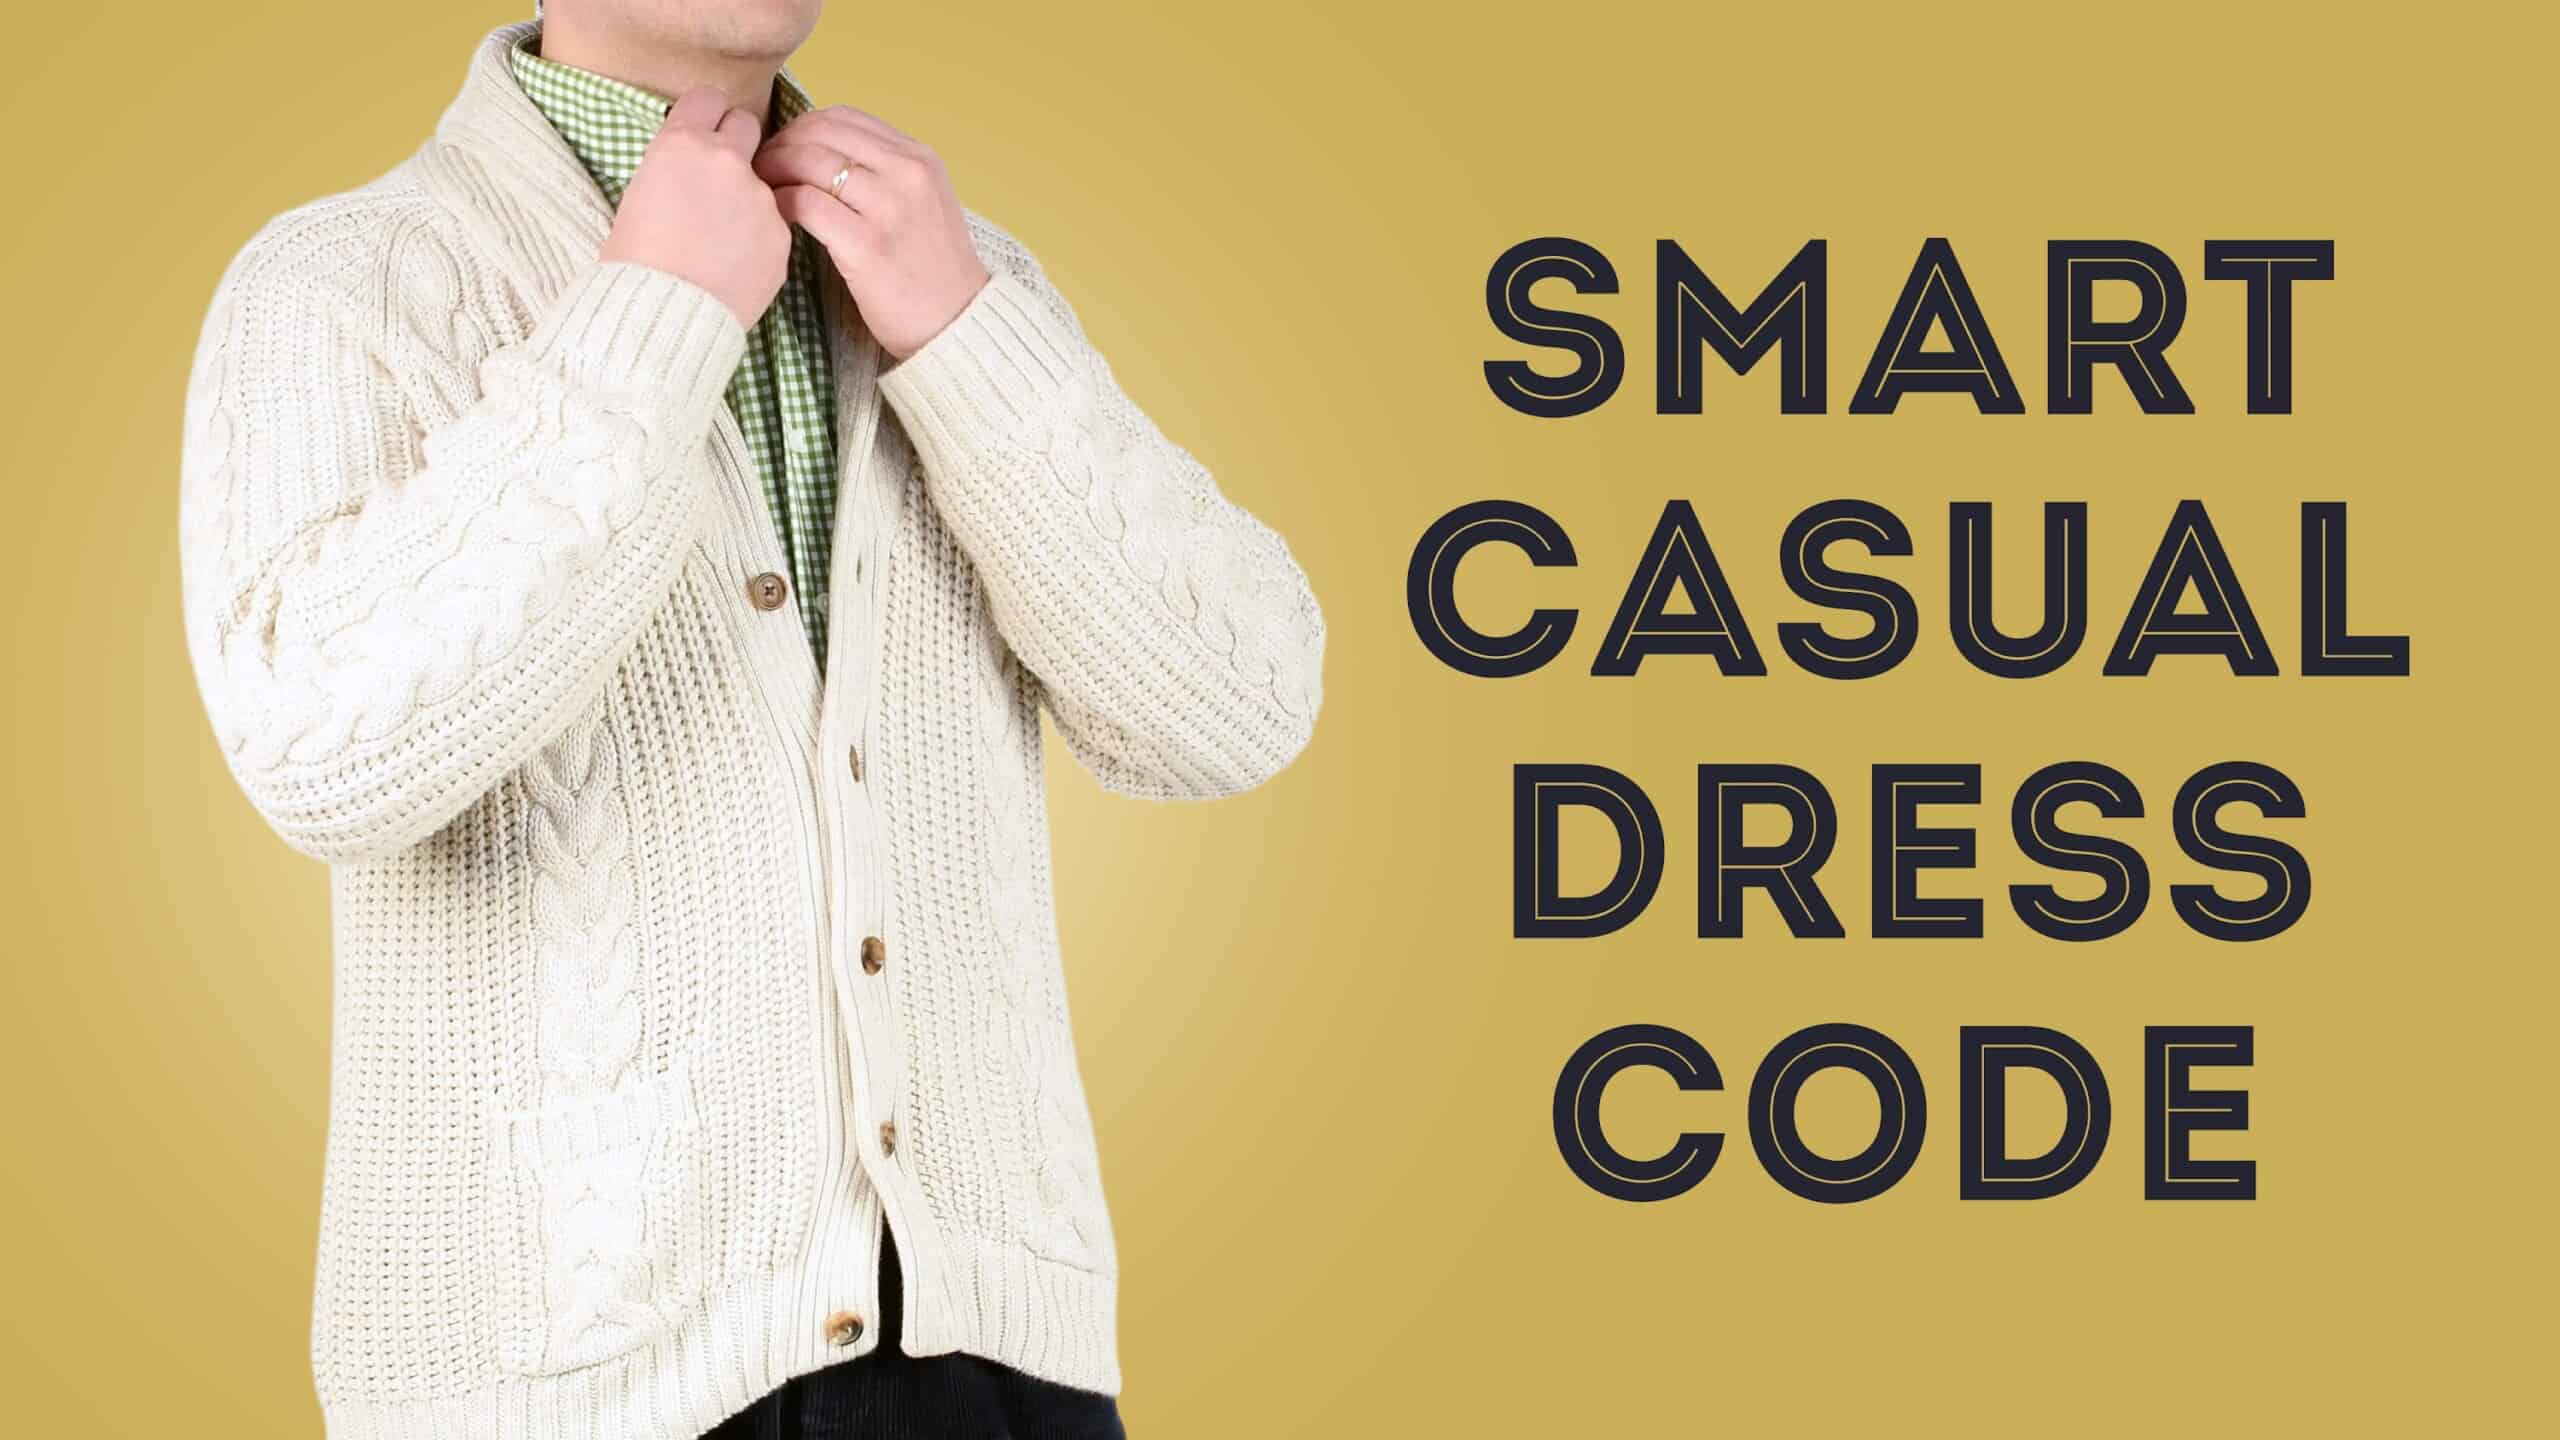 Smart Casual Dress Code For Men Explained - Quick And Simple